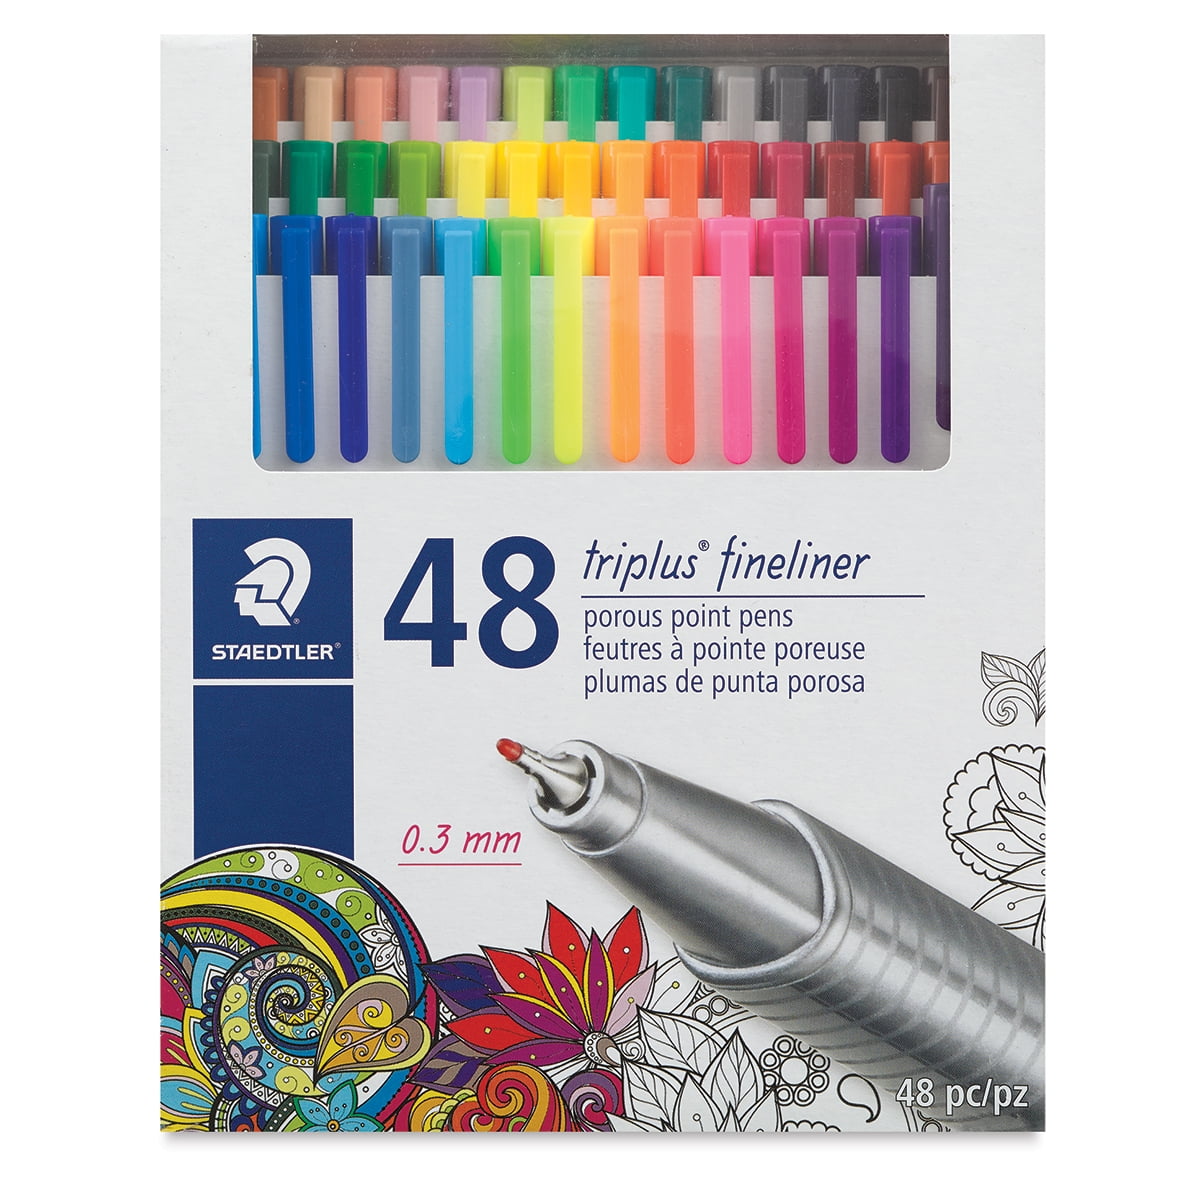 Triplus Fineliner Porous Point Pen, Stick, Extra-Fine 0.3 mm, Assorted Ink  and Barrel Colors, 20/Pack